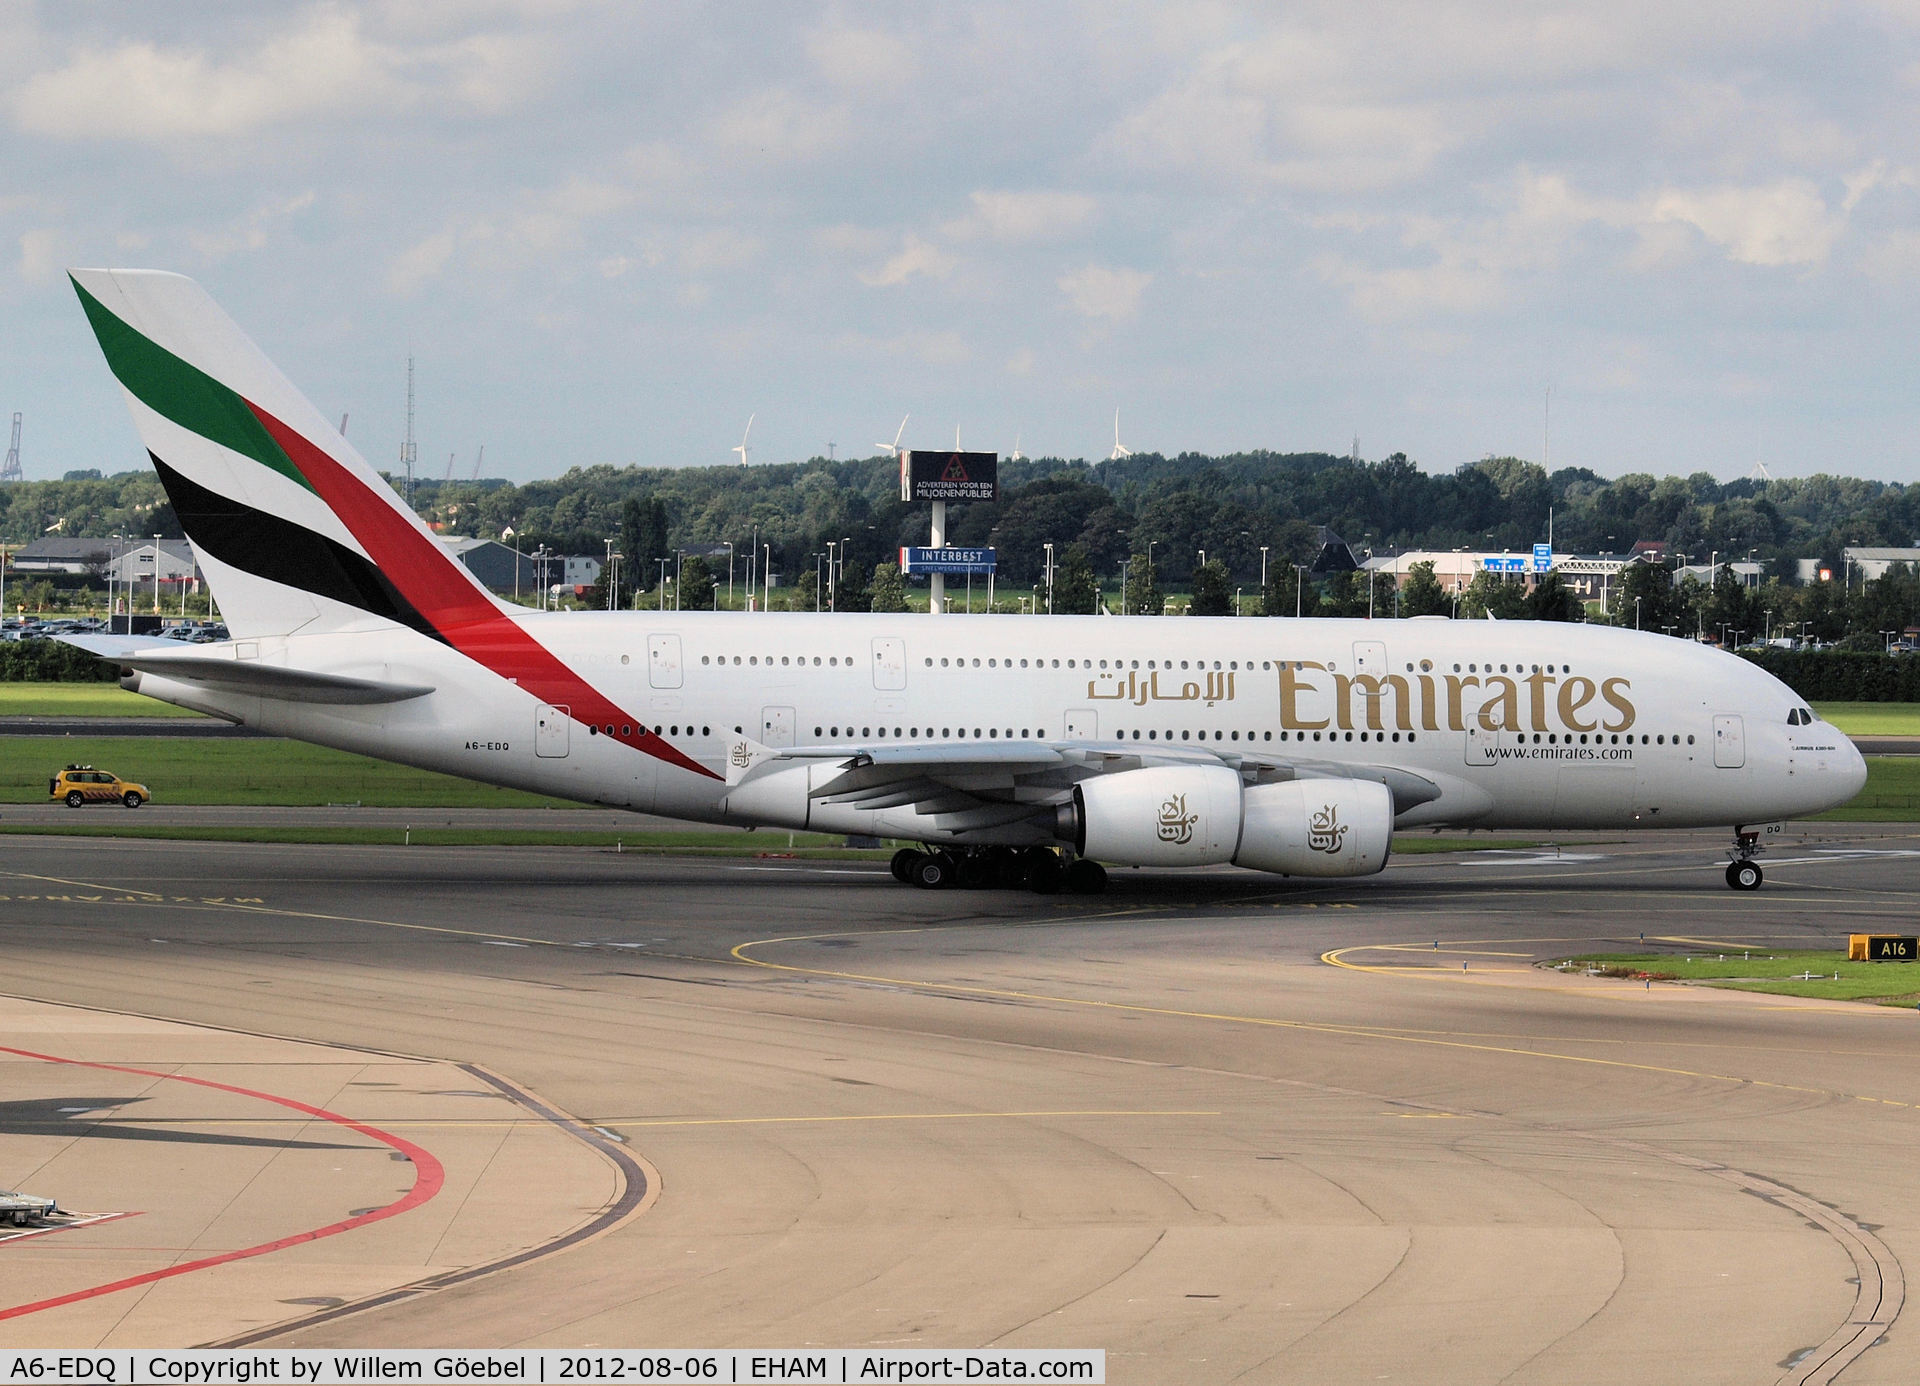 A6-EDQ, 2011 Airbus A380-861 C/N 080, Taxi to runway 24 of Schiphol Airport